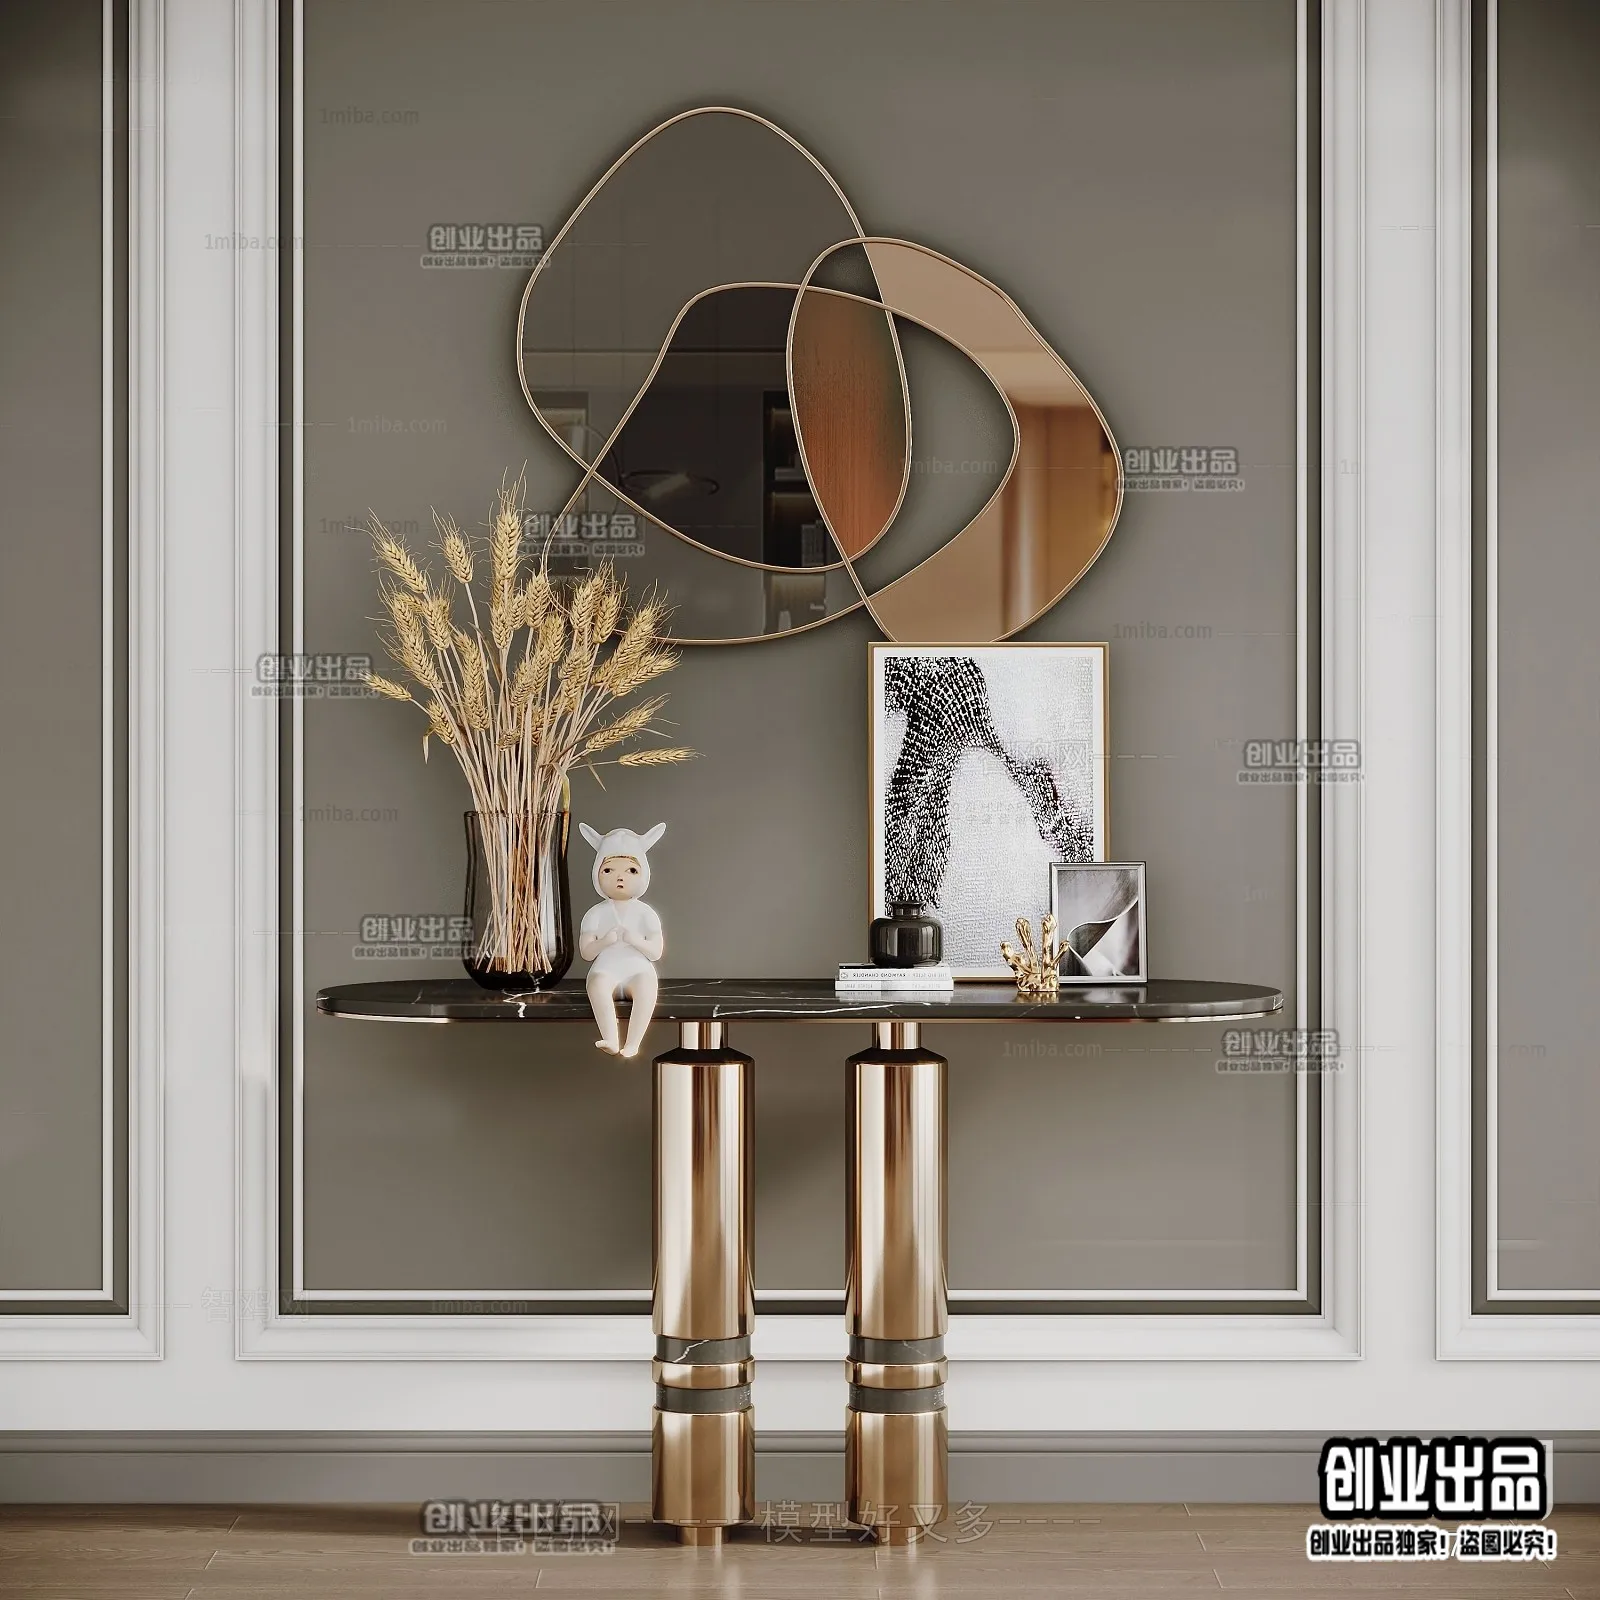 CONSOLE TABLE – 19 – FURNITURE 3D MODELS 2022 (VRAY)